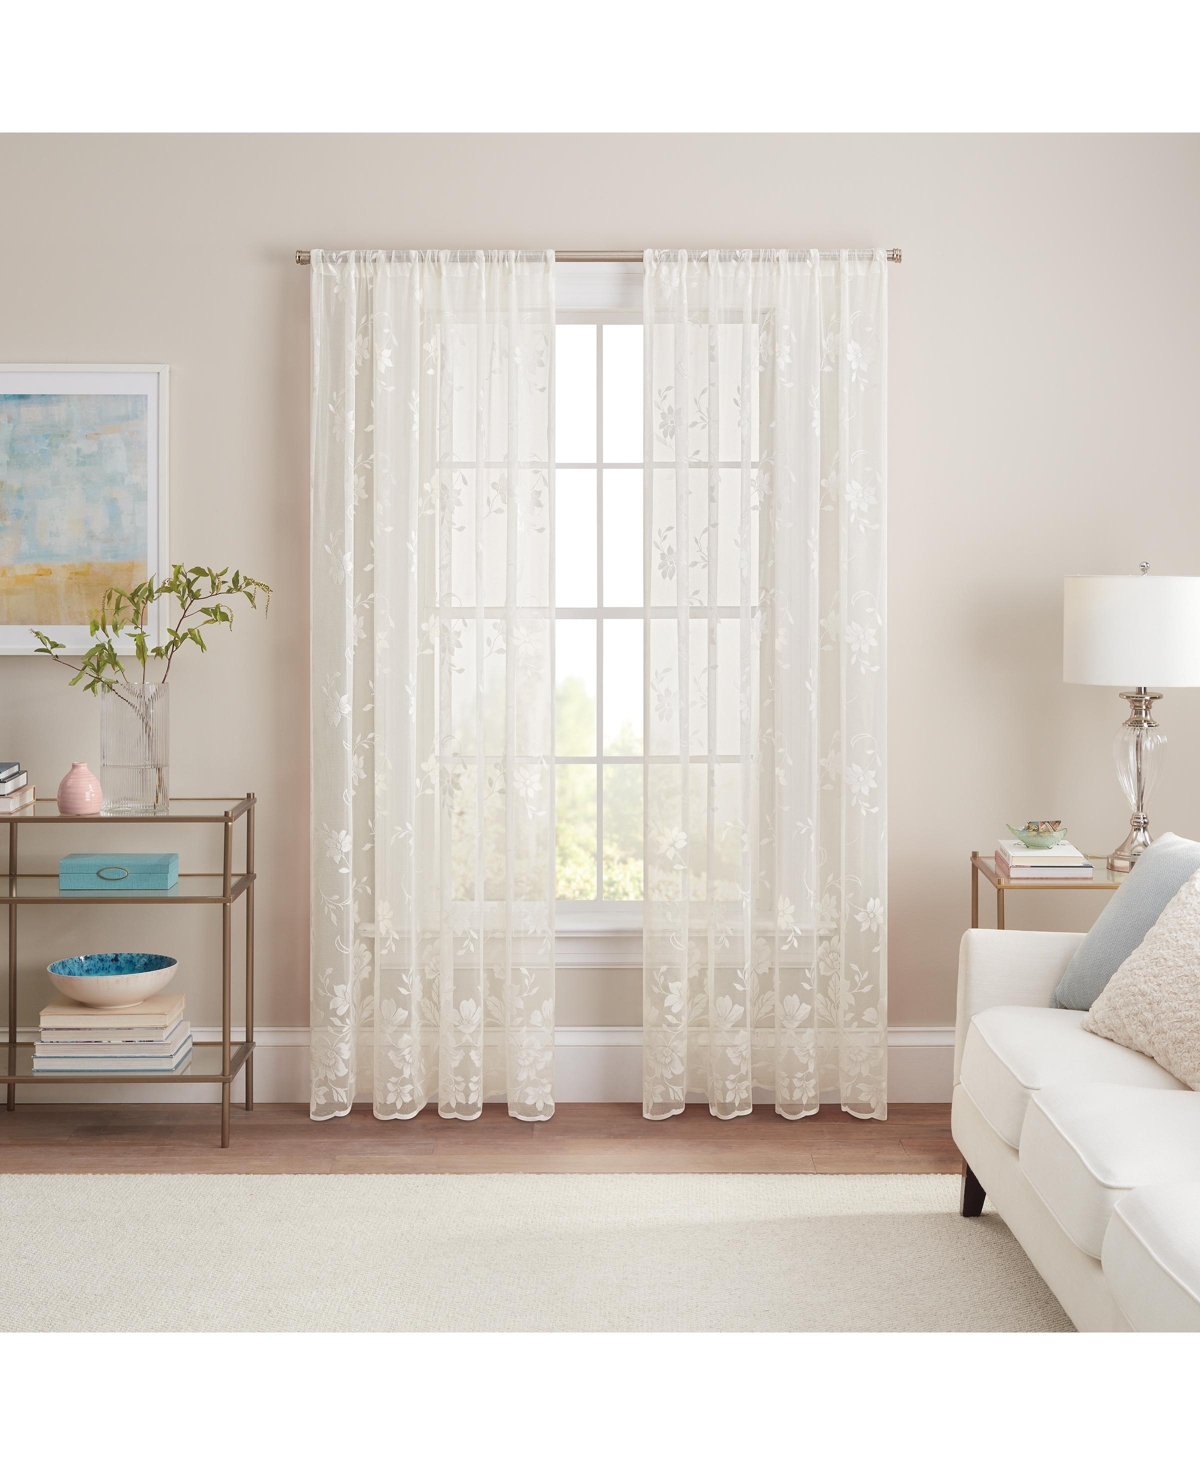 Sherry Floral Lace Sheer Rod Pocket Curtain Panel, 54" x 63" - Blush